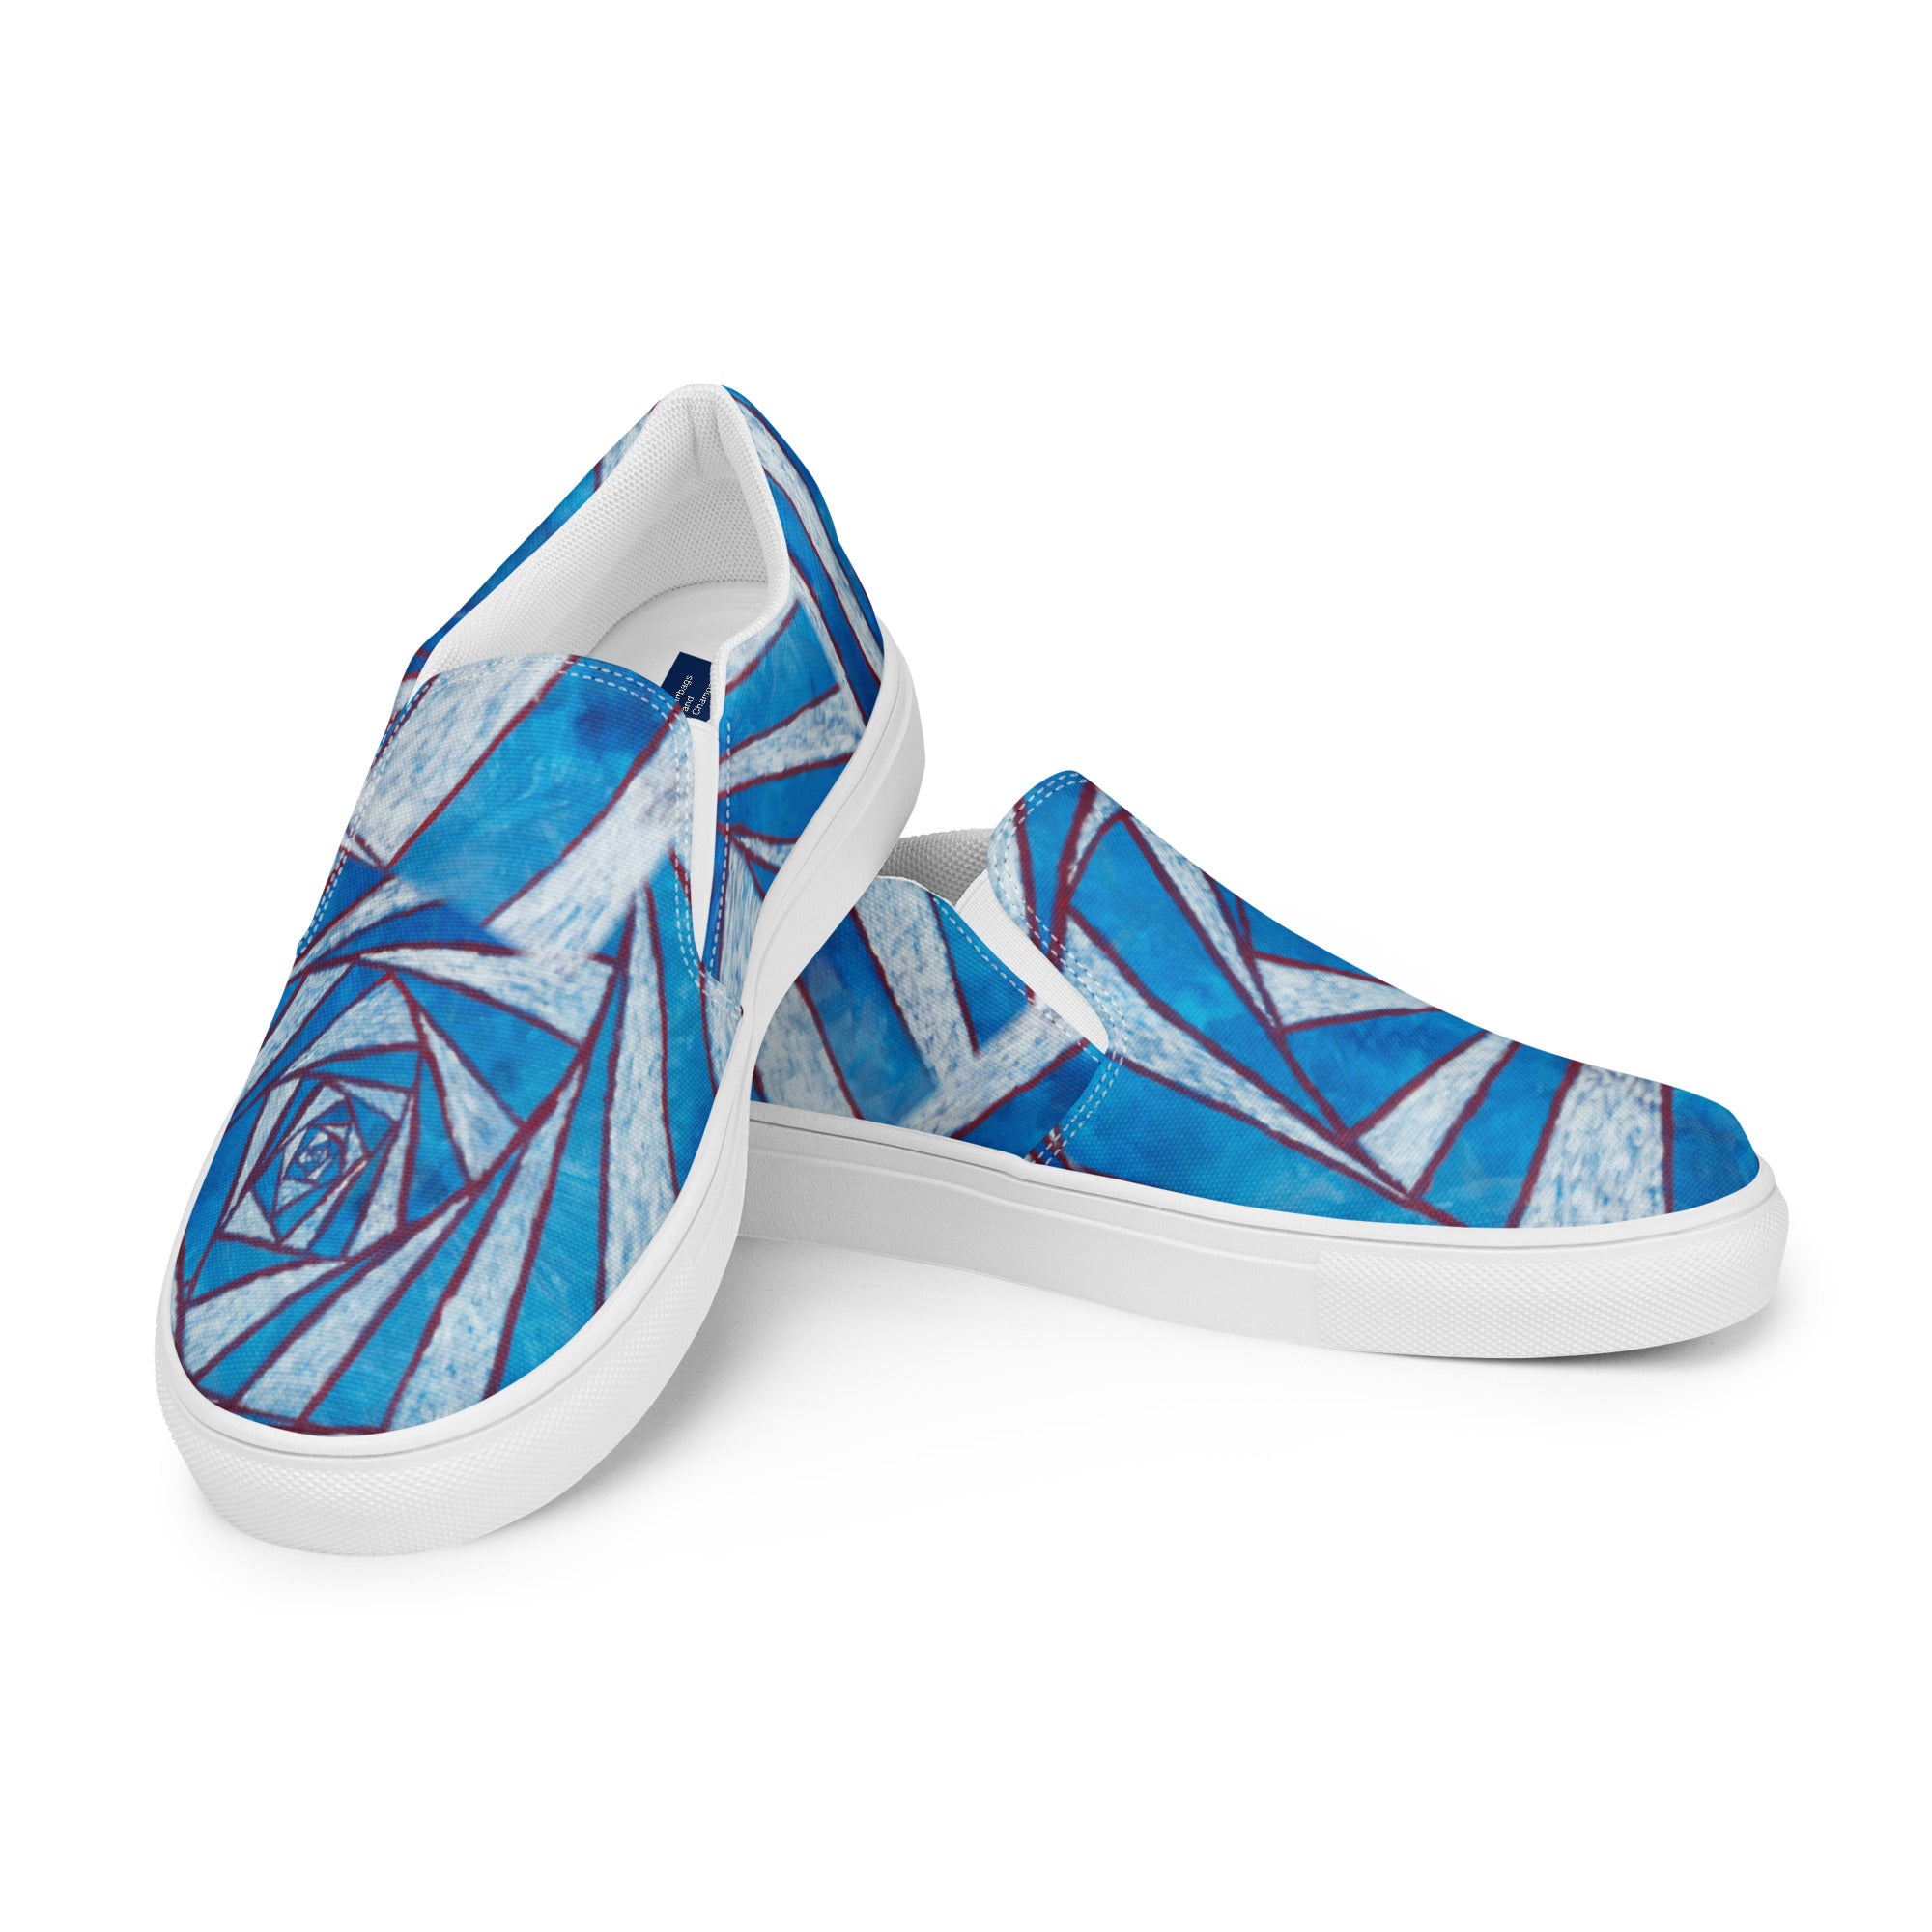 spiraling out of control Women’s slip-on canvas shoes